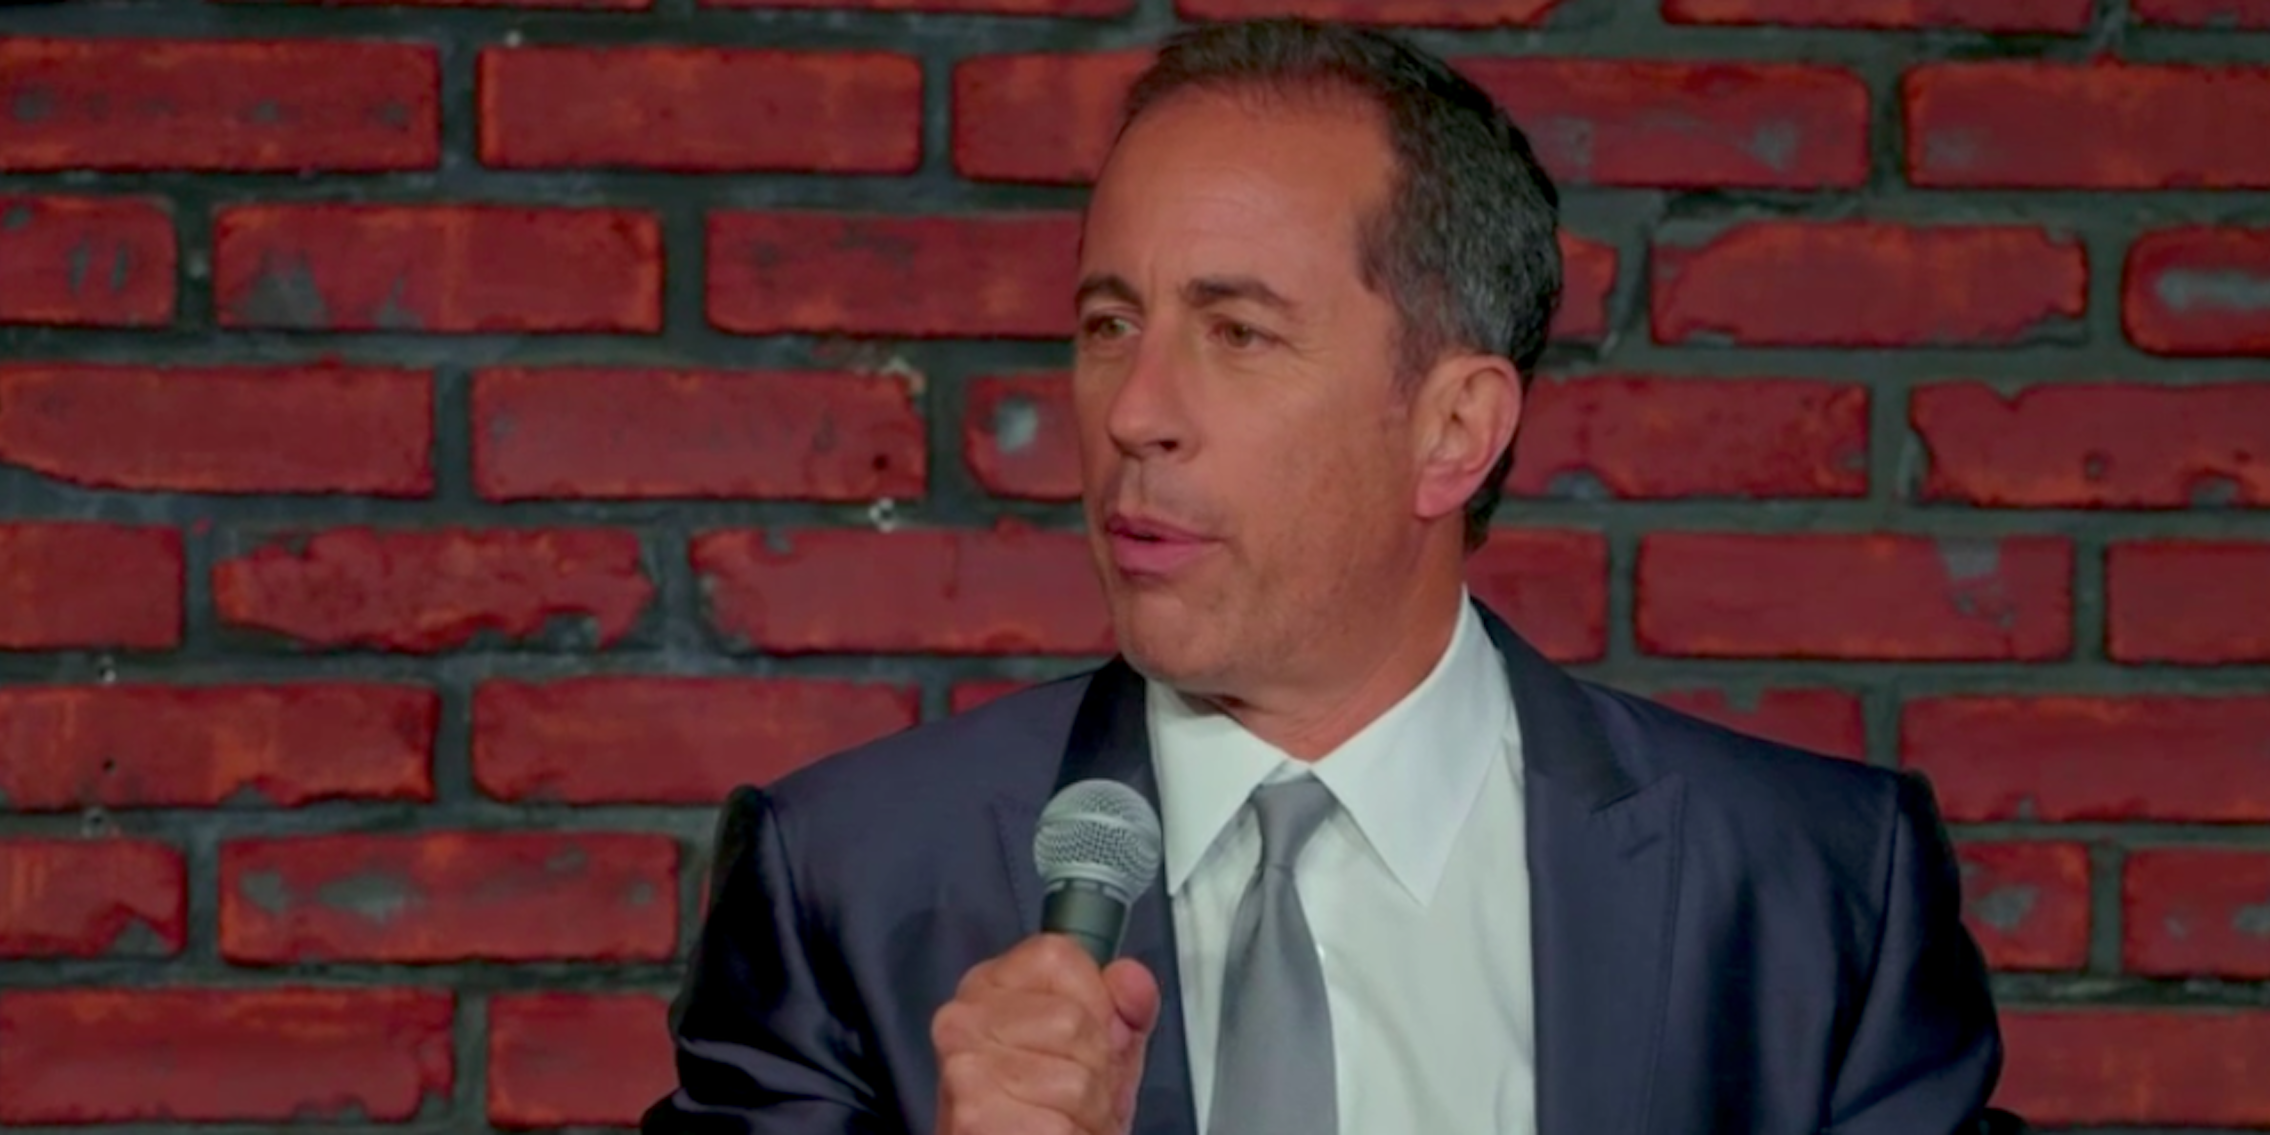 stand-up on netflix : jerry before seinfeld